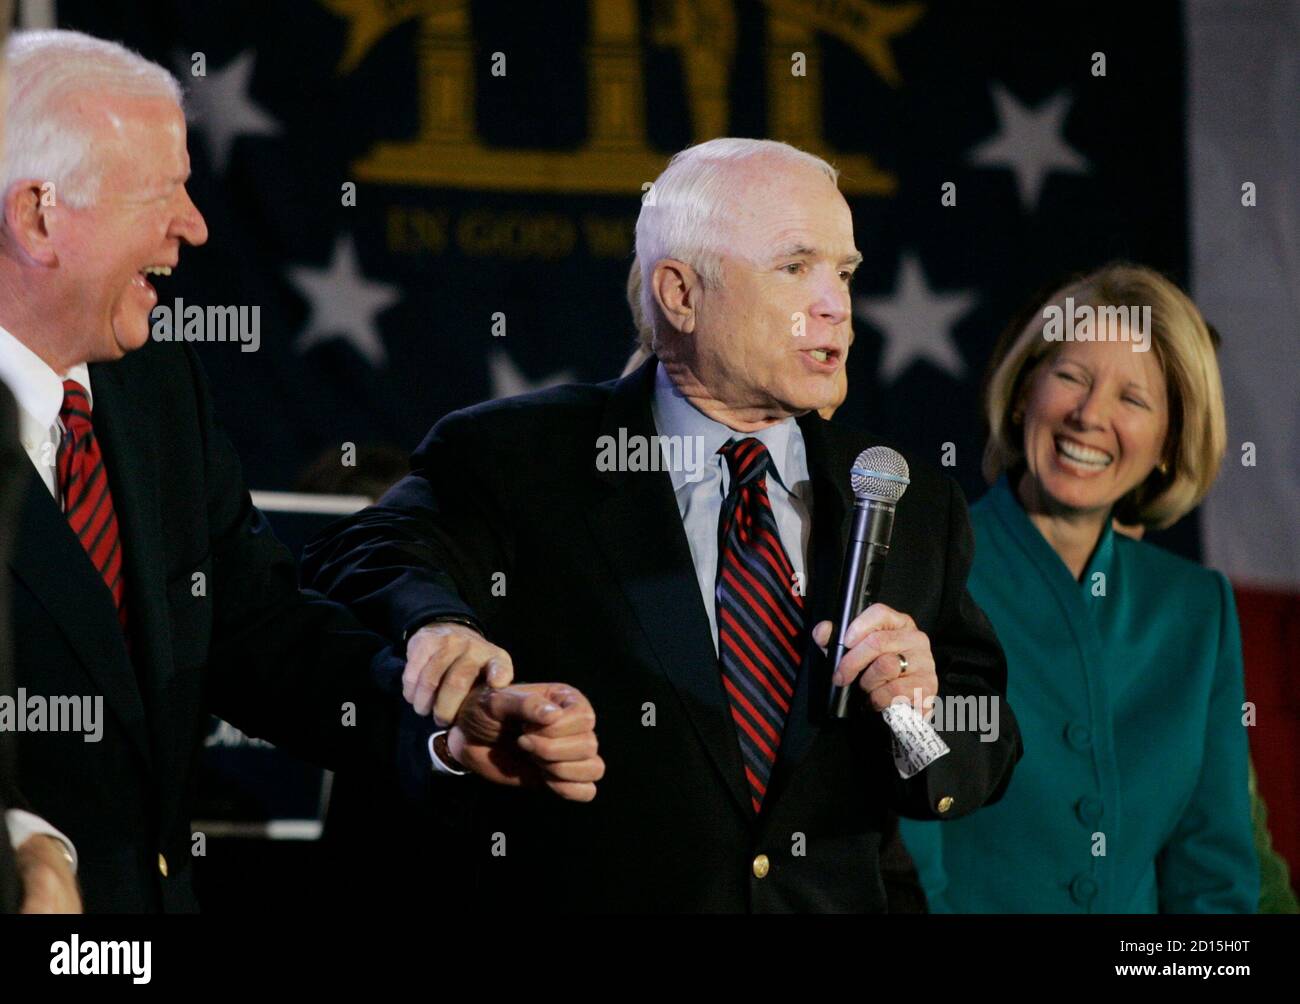 US Republican presidential candidate and Senator John McCain (R-AZ) (C) grabs the arm of Georgia US Senator Saxby Chambliss during a rally at the Cobb Arts Centre in Marietta, Georgia February 2, 2008. Lady at right is Kitty Martinez, the wife of Florida US State Senator Mel Martinez.  REUTERS/Tami Chappell  (UNITED STATES)  US PRESIDENTIAL ELECTION CAMPAIGN 2008 (USA) Stock Photo